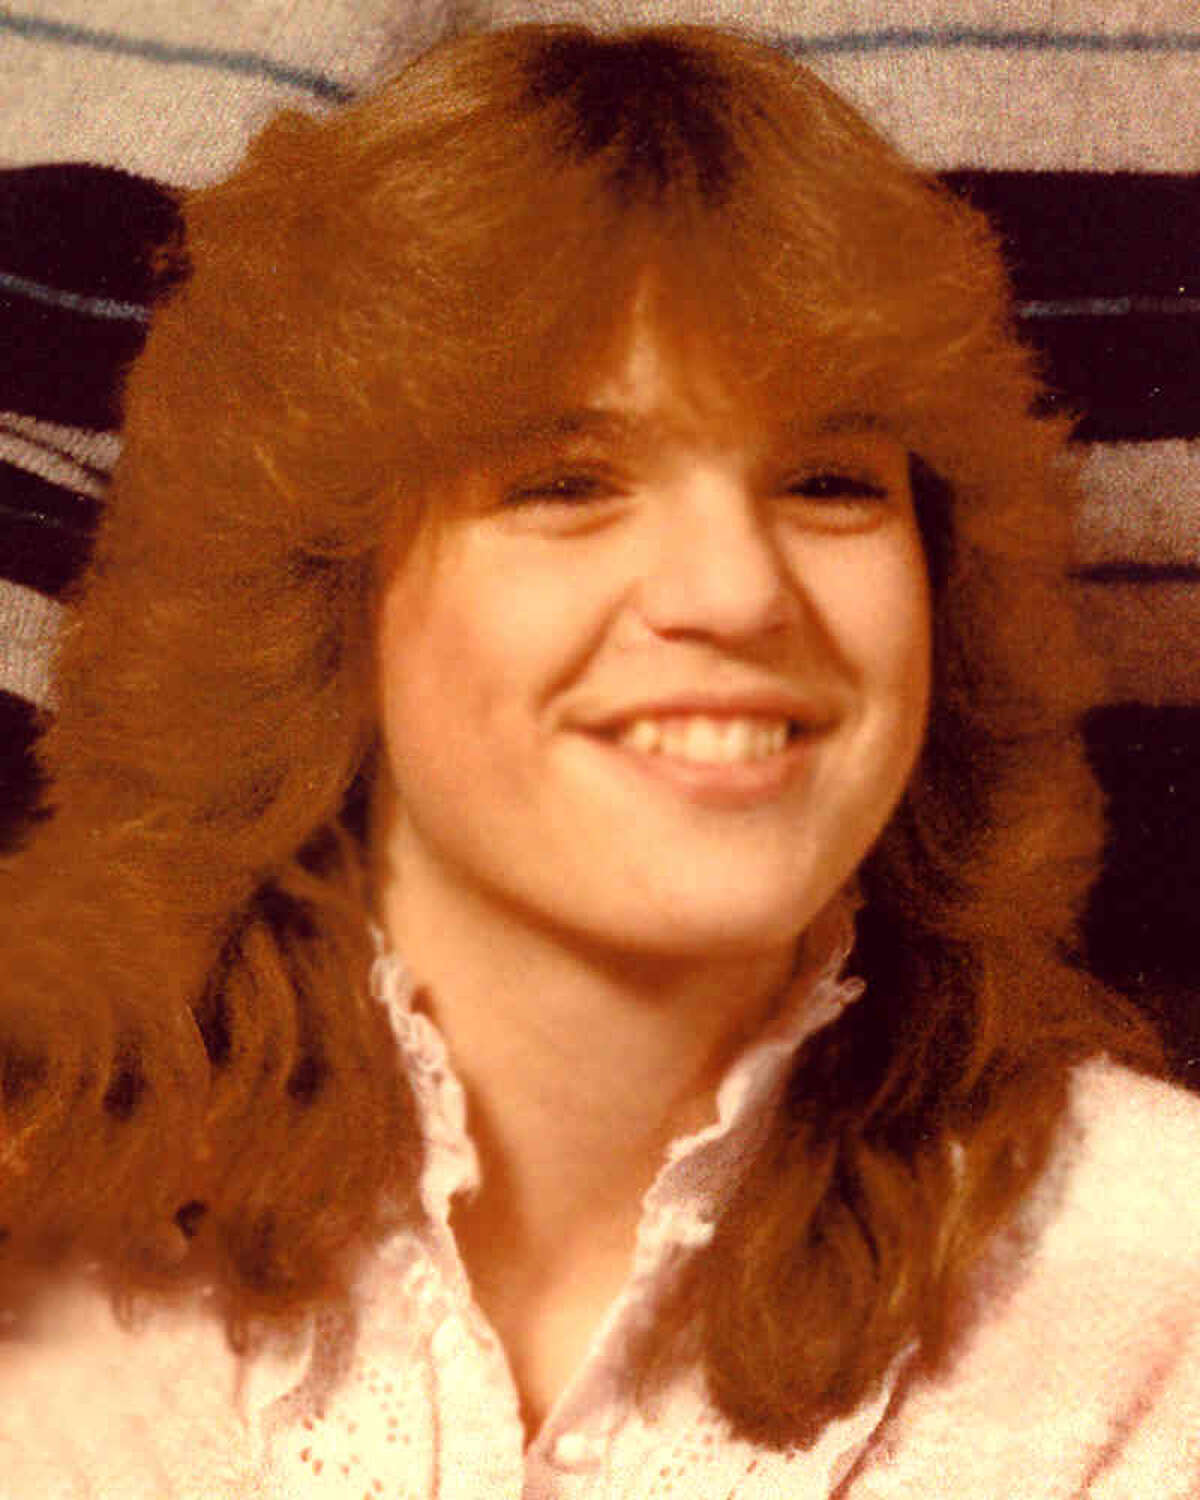 Tammie McCormick was 13 when she disappeared in Saratoga Springs on April 29, 1986. Saratoga Springs police are pursuing leads that they case could allow them to name a suspect in her death. (Courtesy: National Center for Missing & Exploited Children)